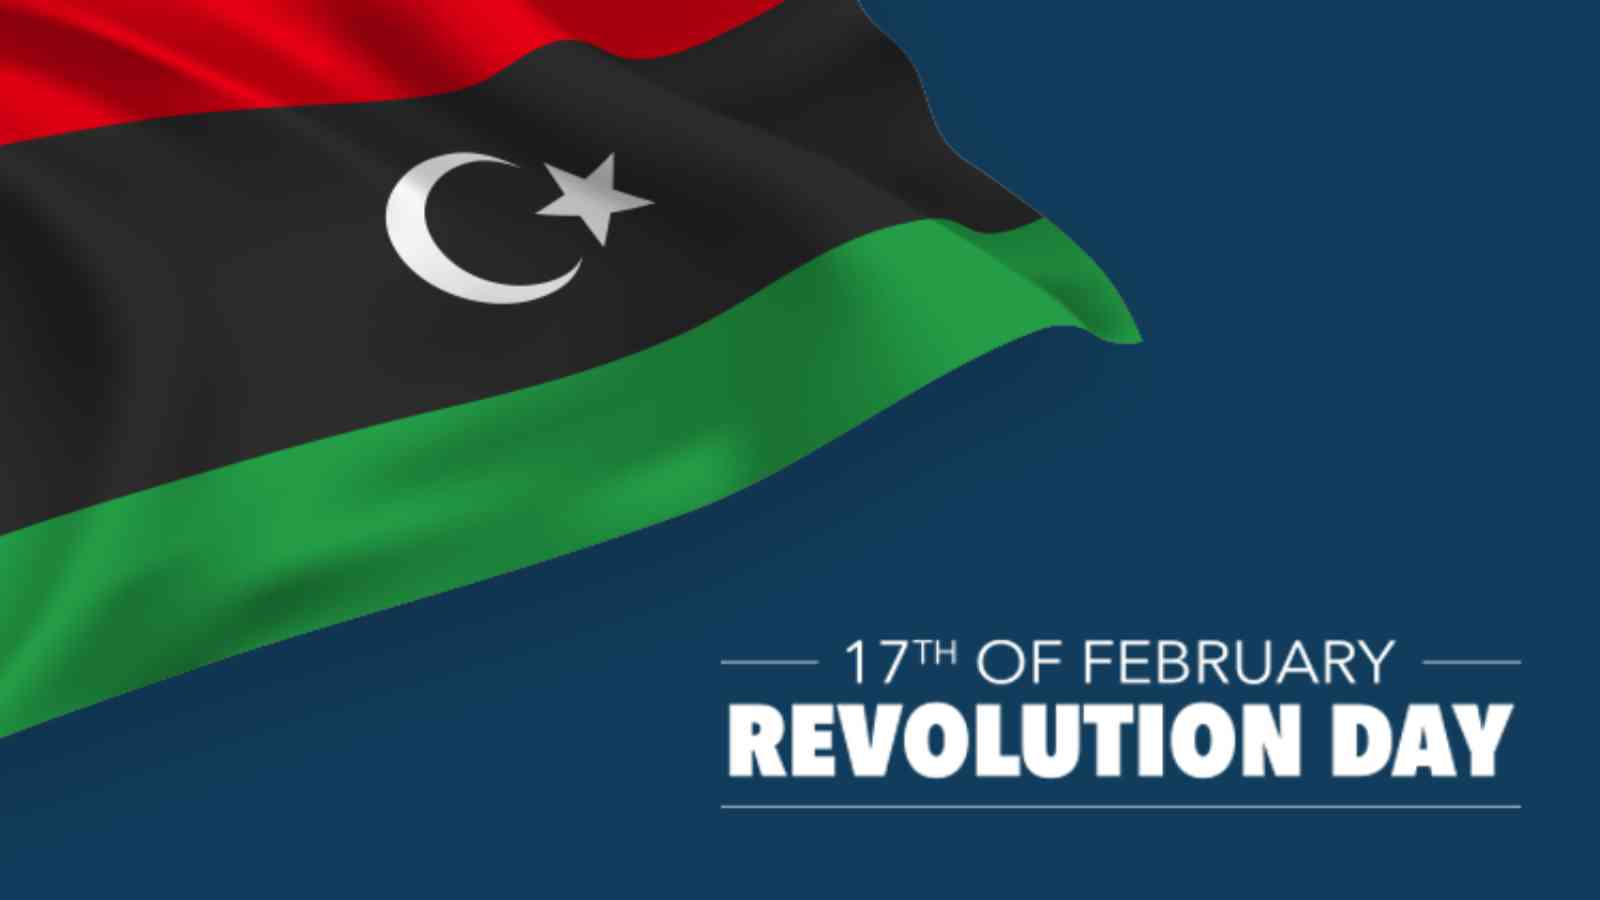 February 17th Revolution: Date, History, Facts about Libya